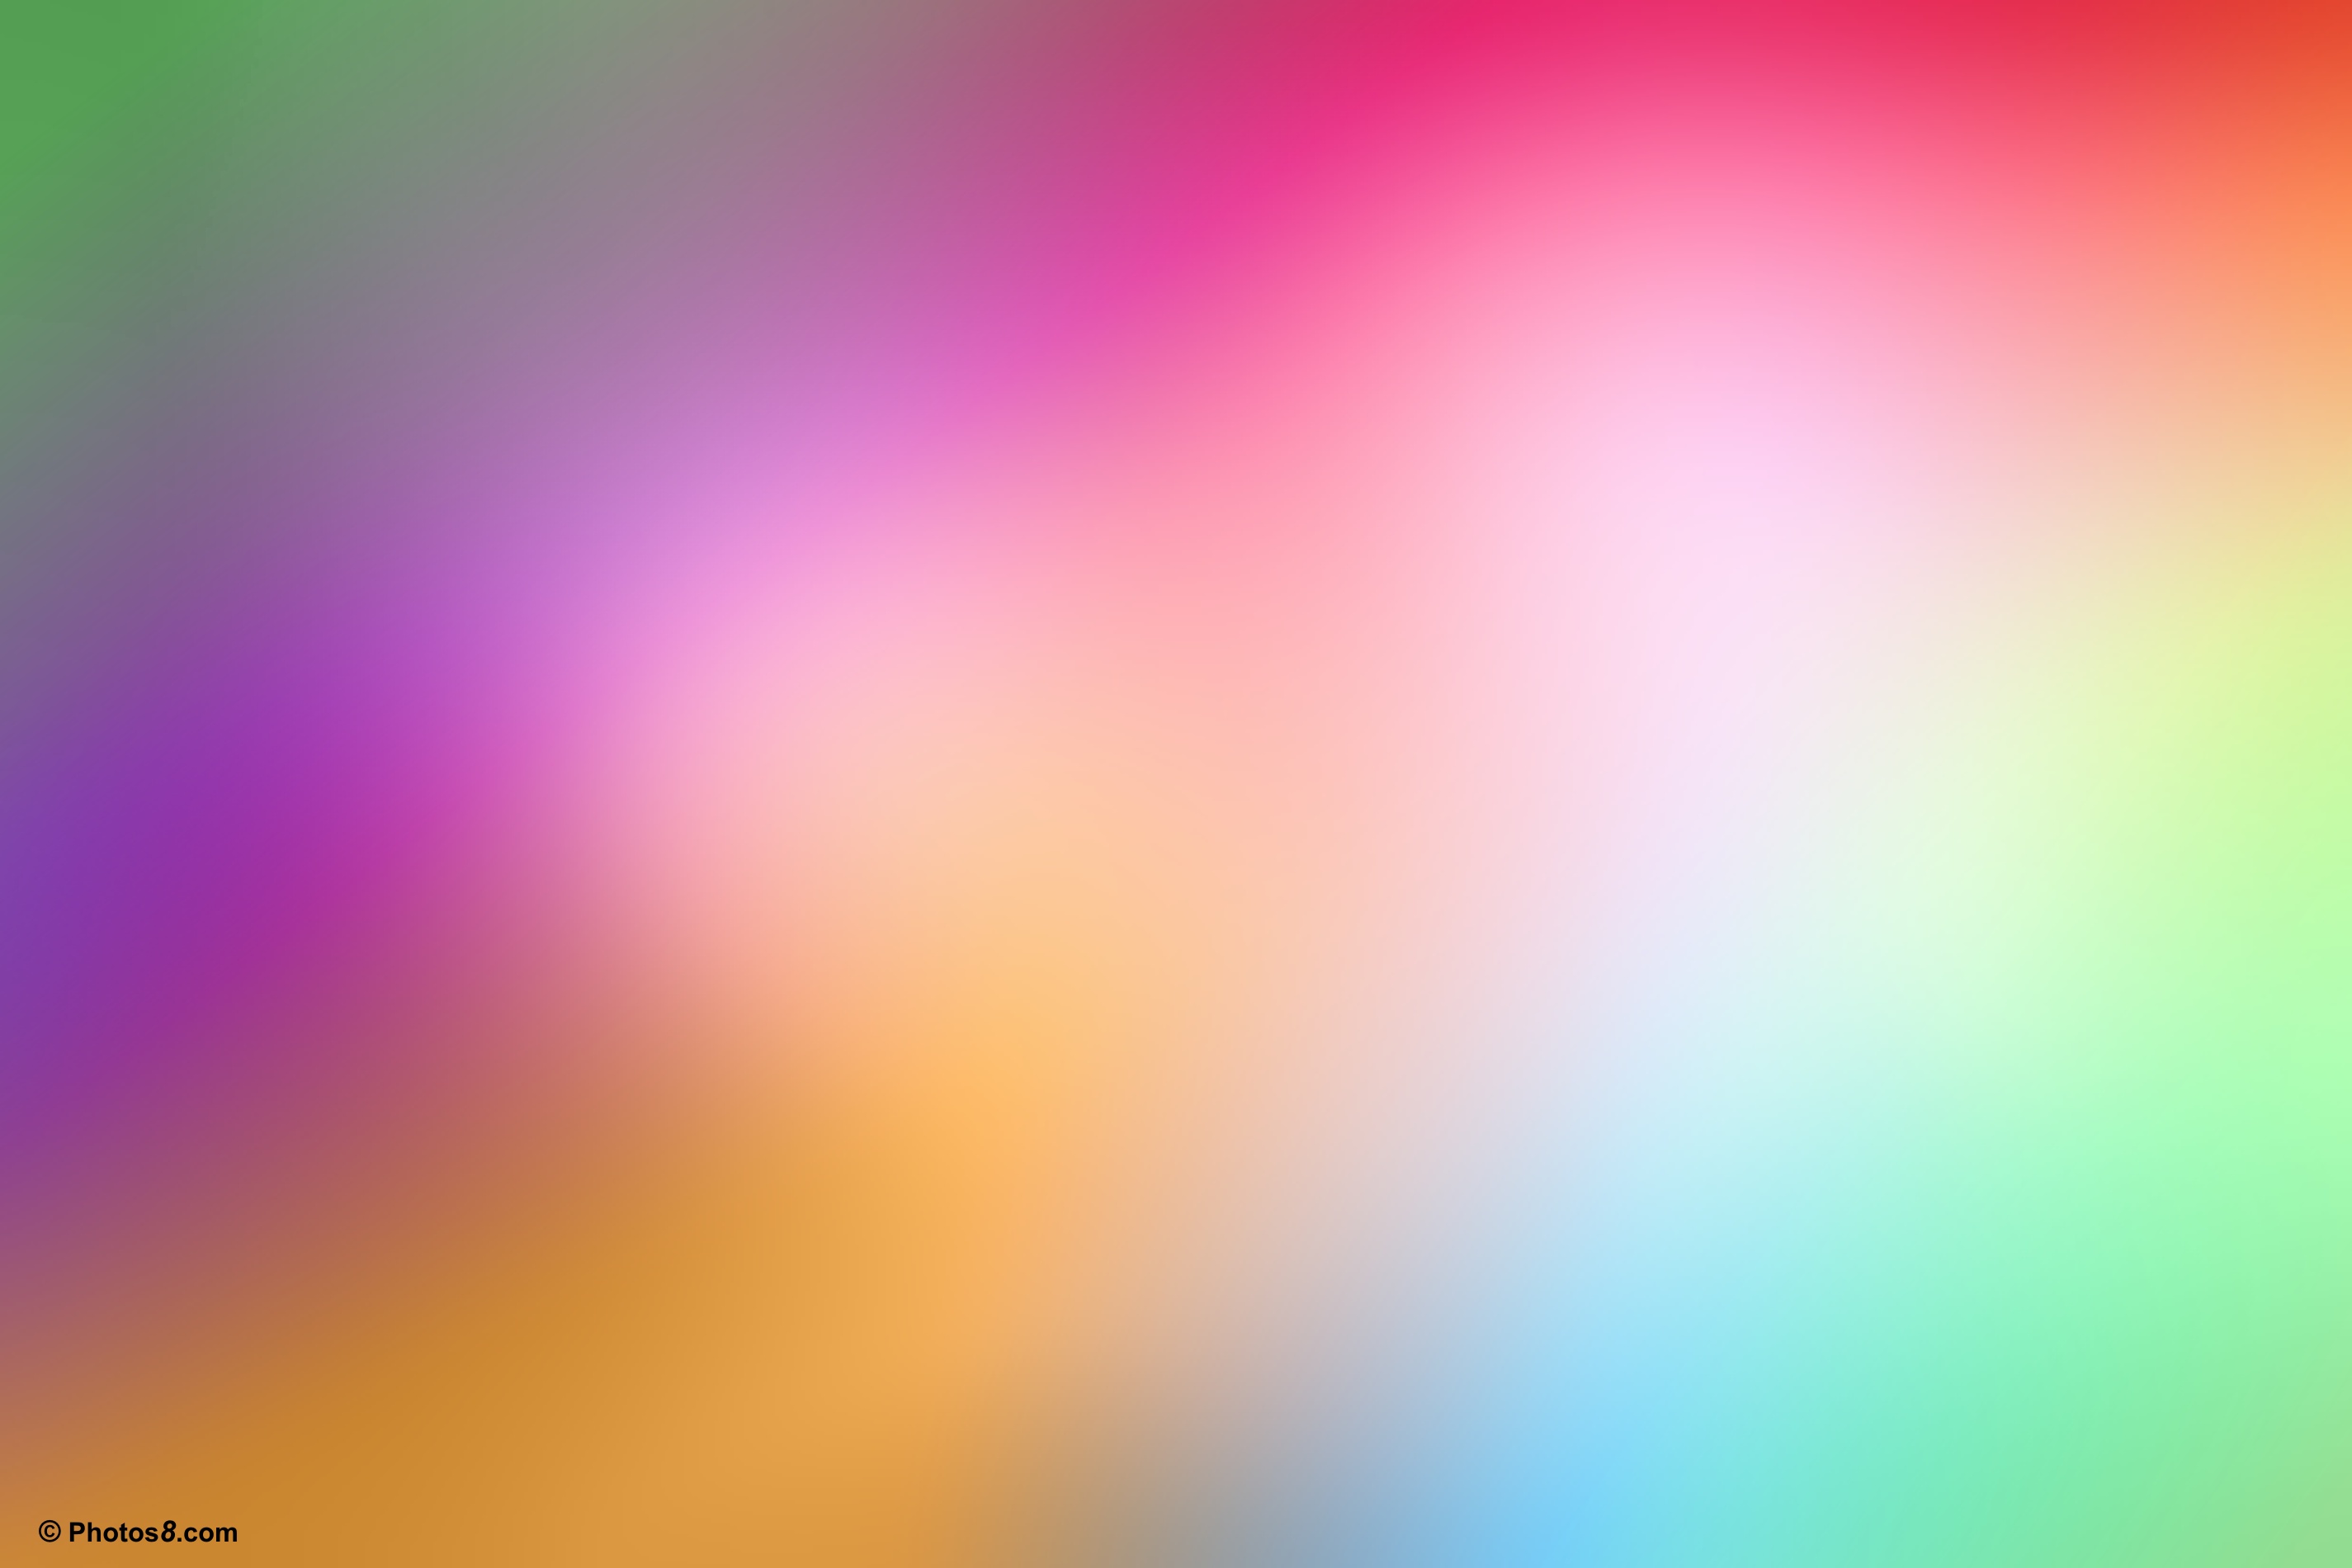 Pics Photos   Blurred Colors Image Backgrounds For